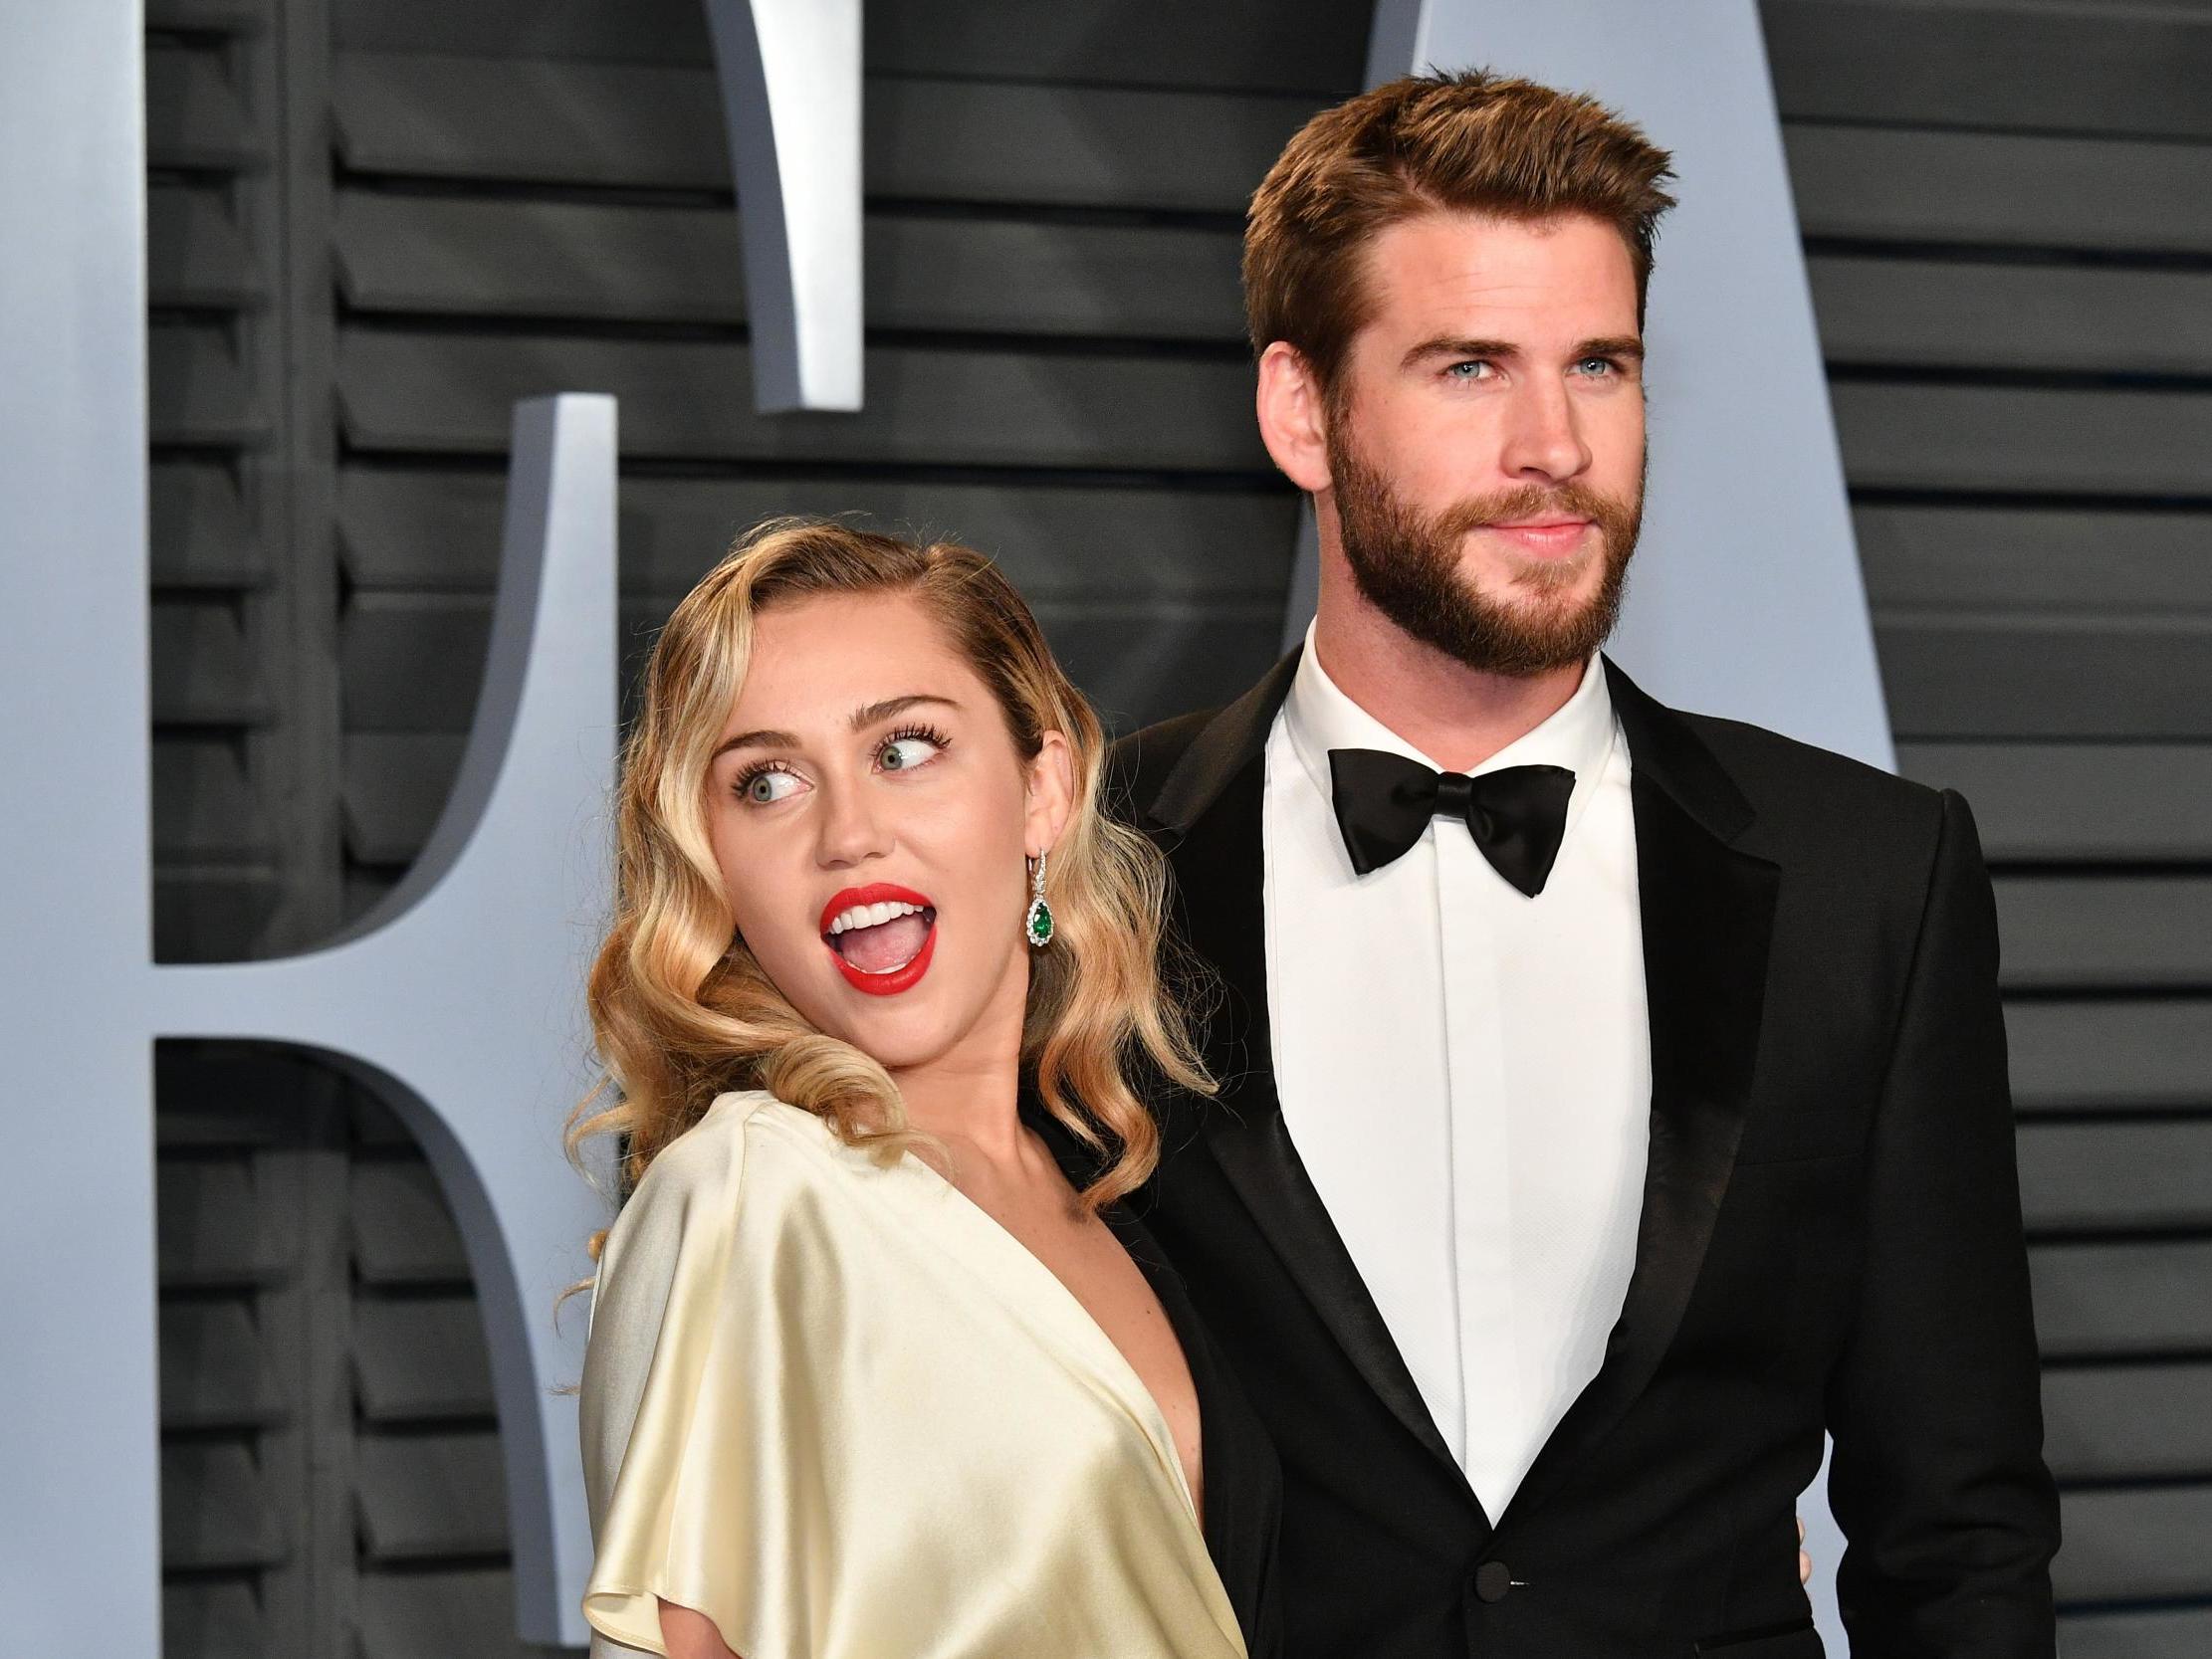 miley-cyrus-says-her-divorce-from-liam-hemsworth-fg-sucked